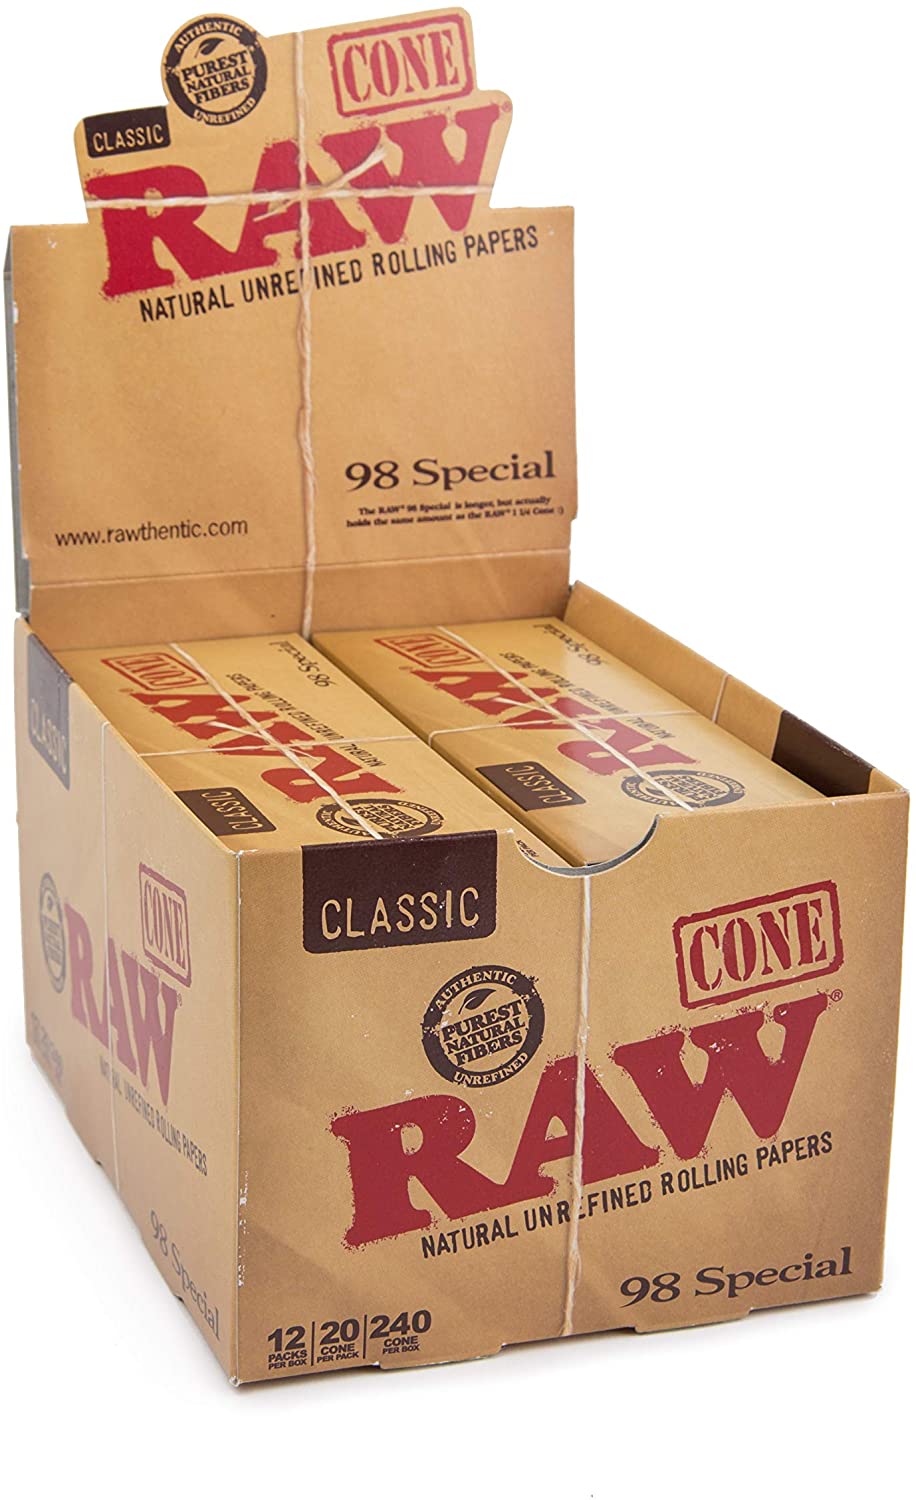 MJ Supply + Co's Featured RAW 98 Special Size Cones